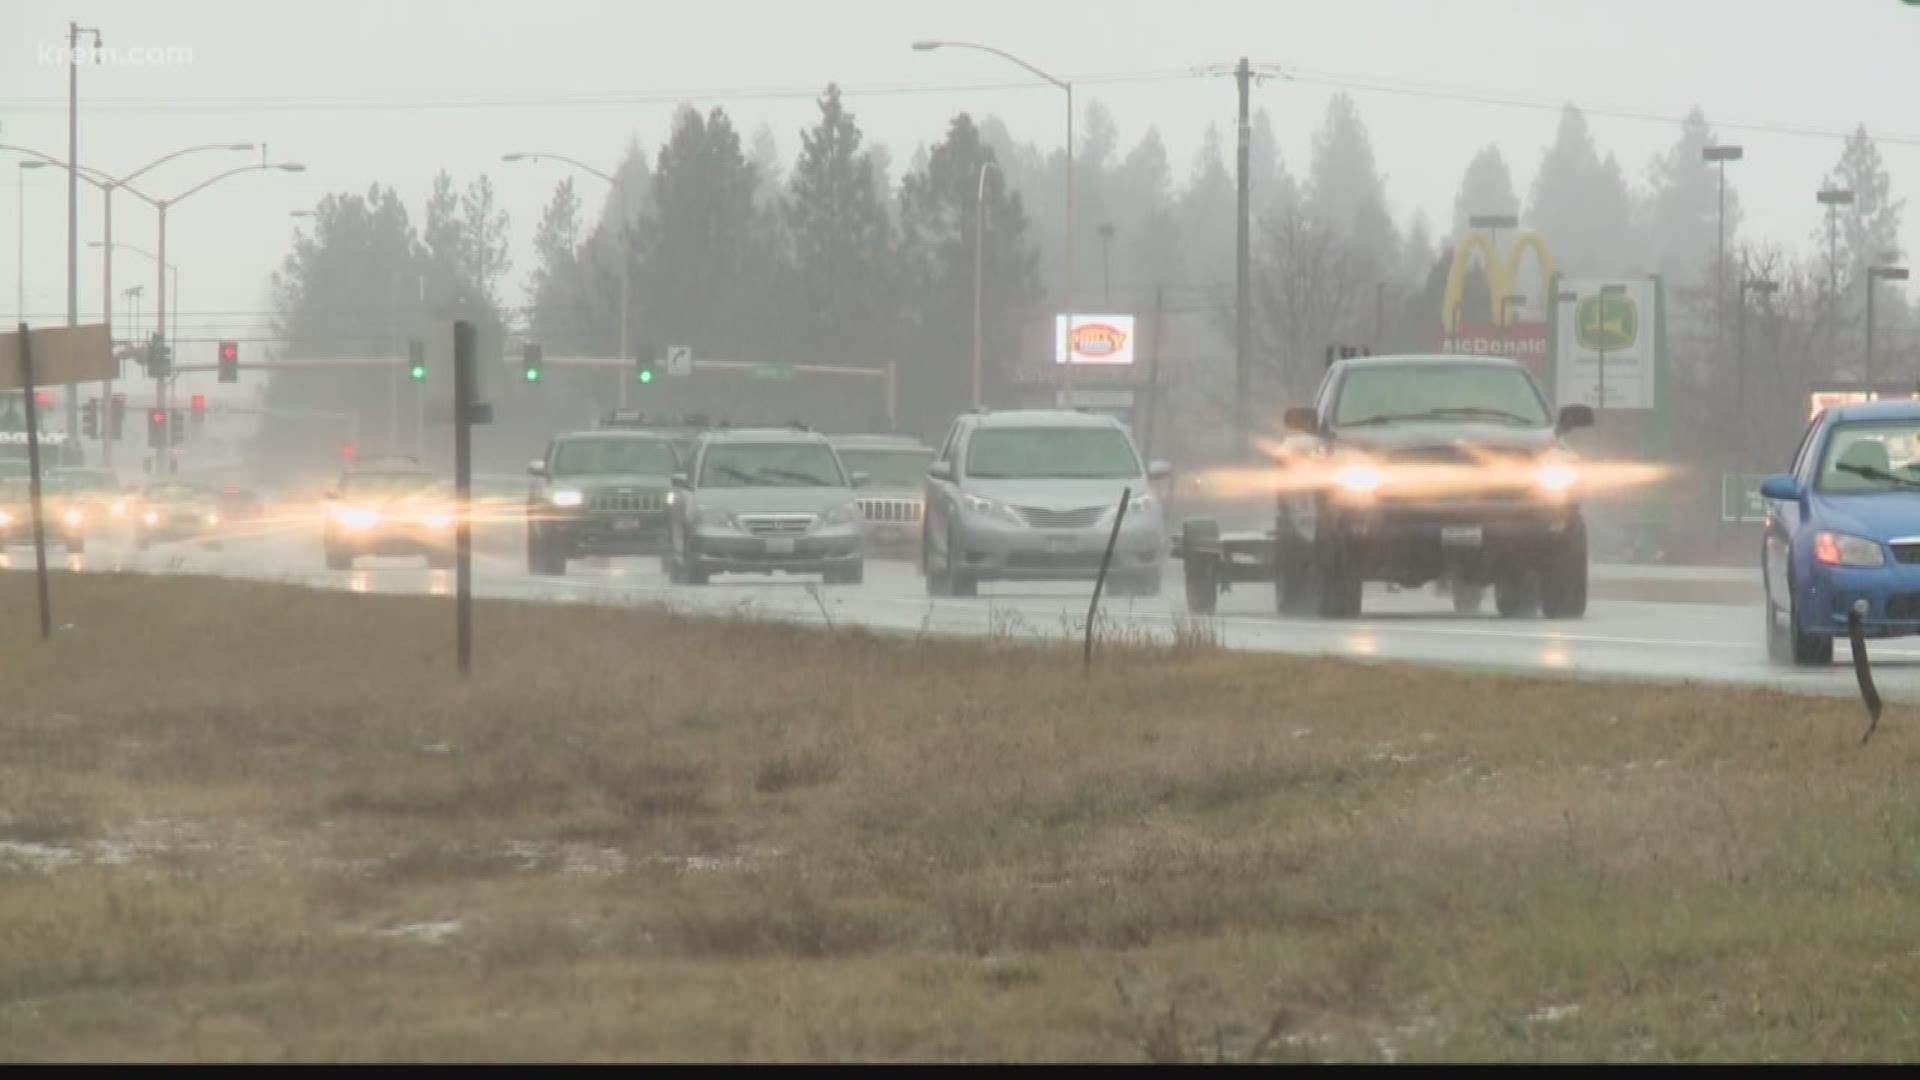 The study comes as North Idaho, and Kootenai County in particular, continues to see increases in traffic.